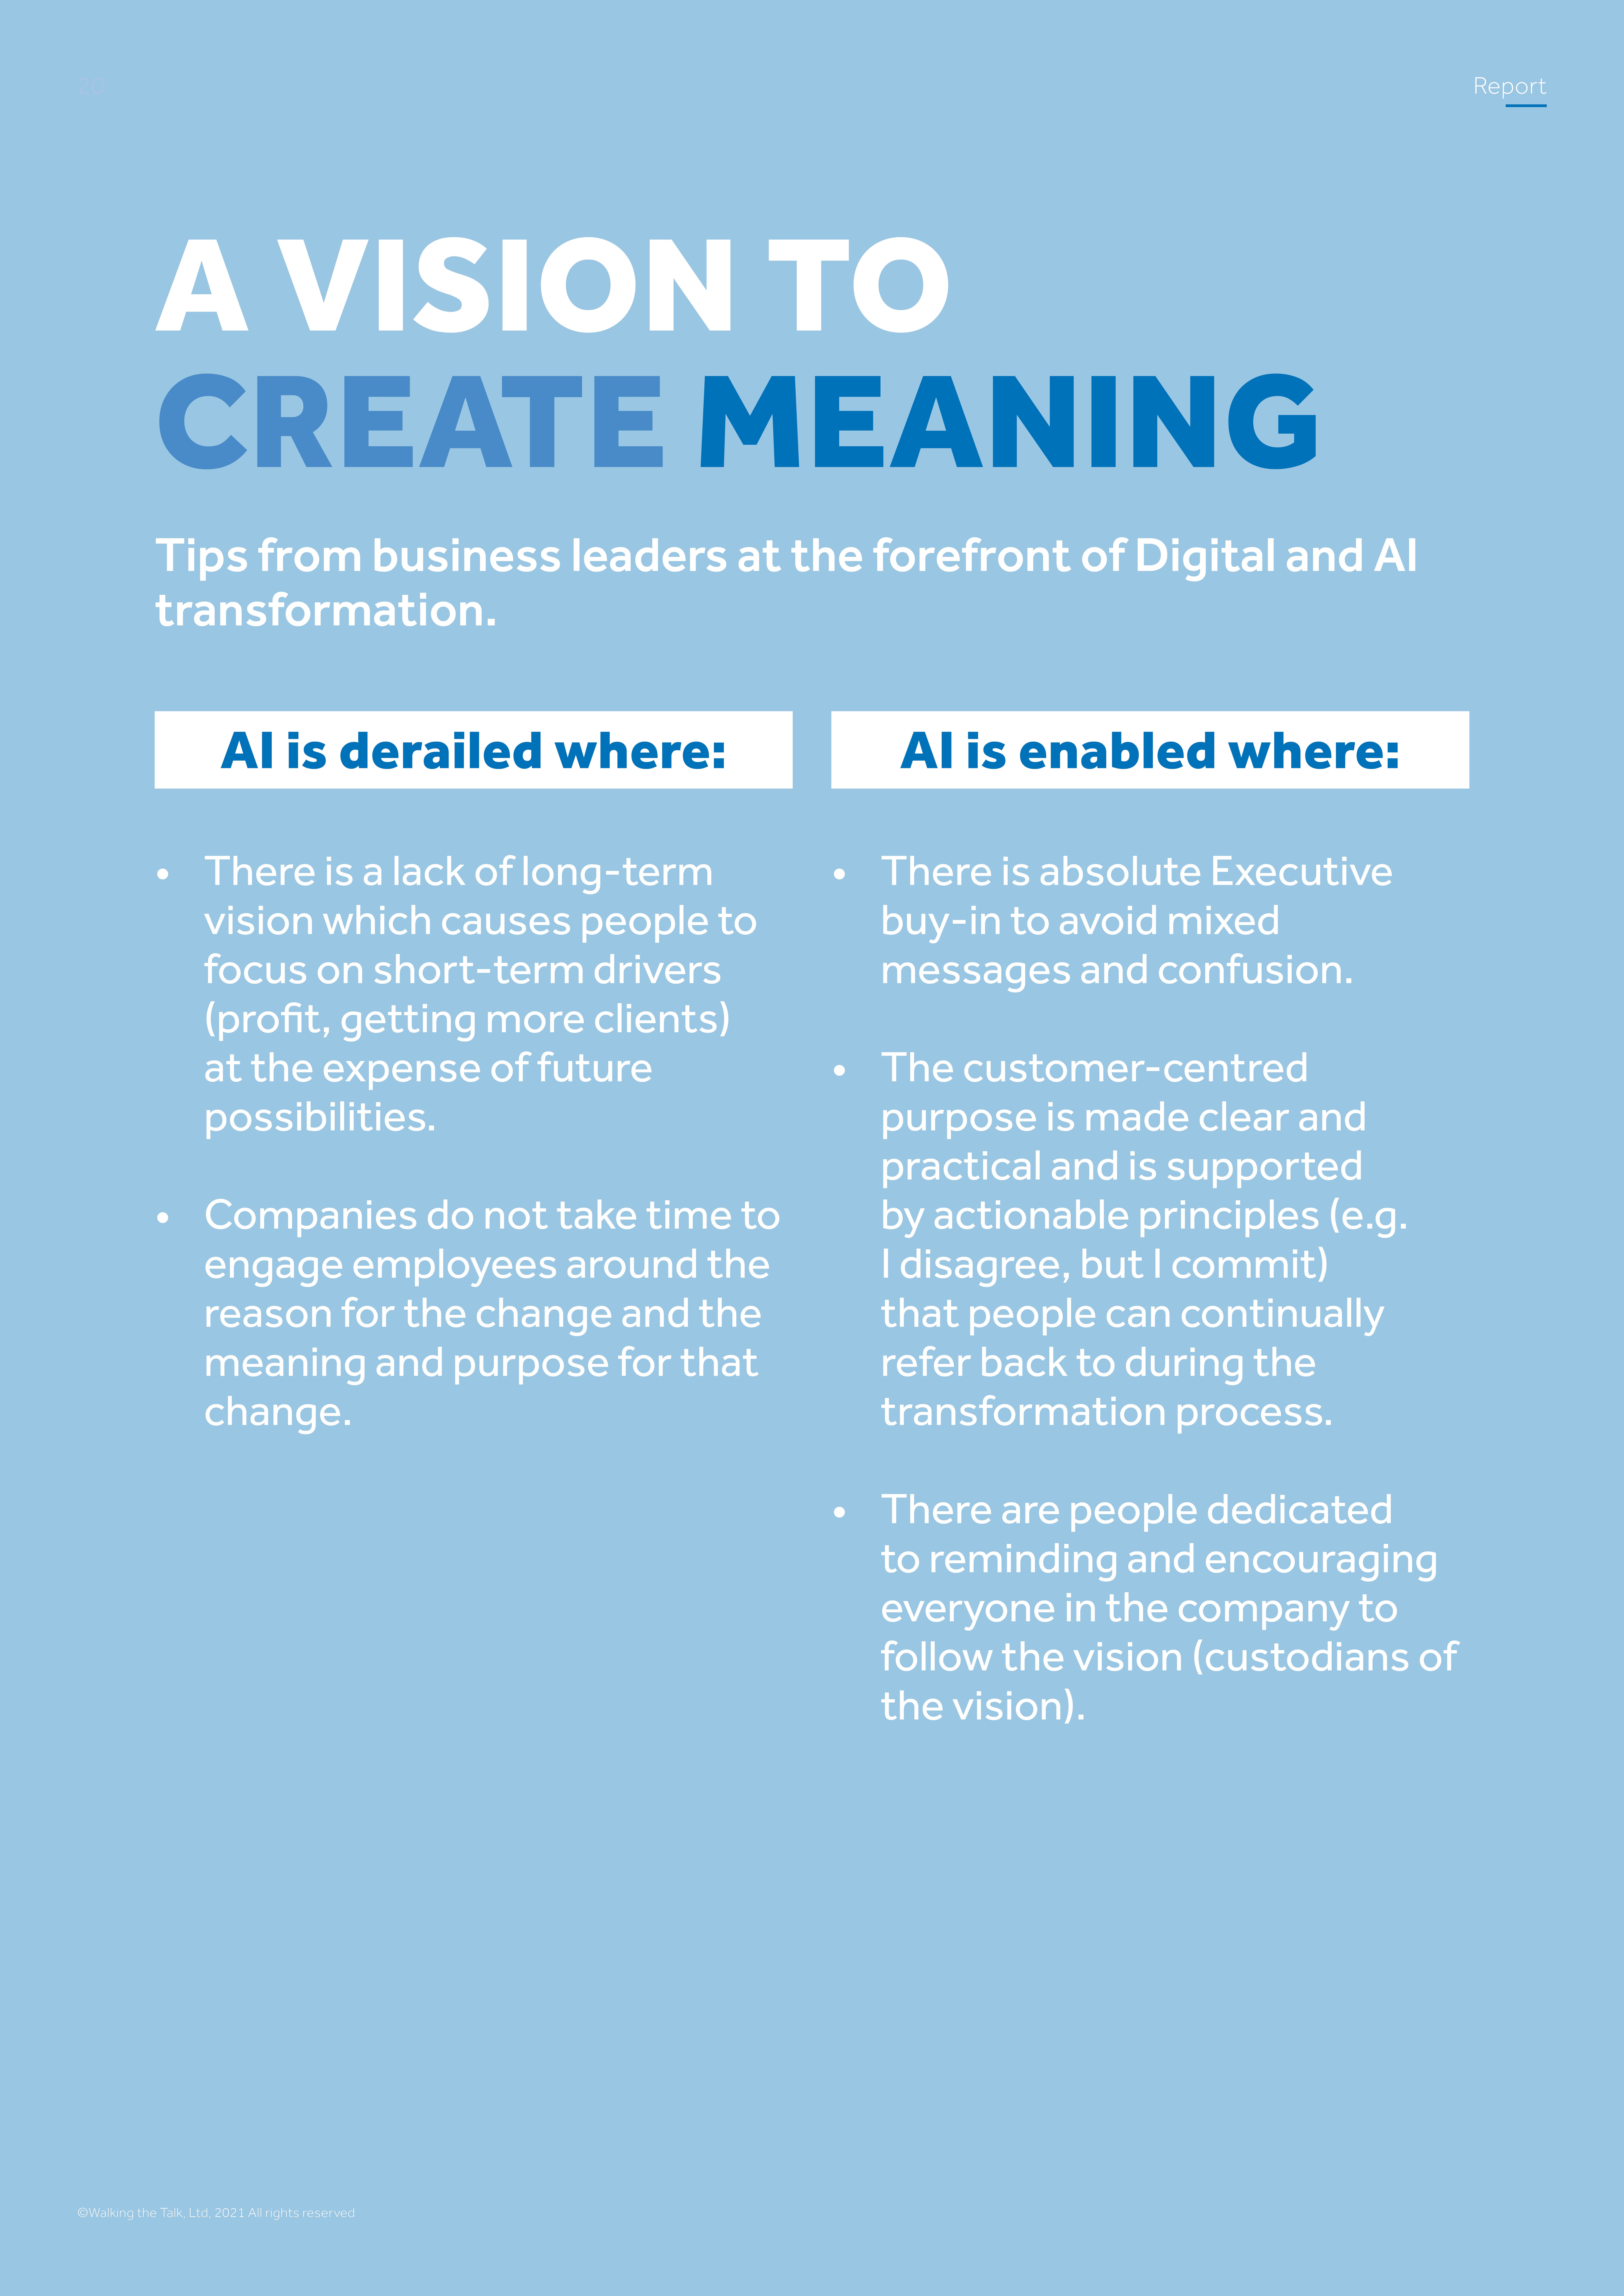 A vision to create meaning